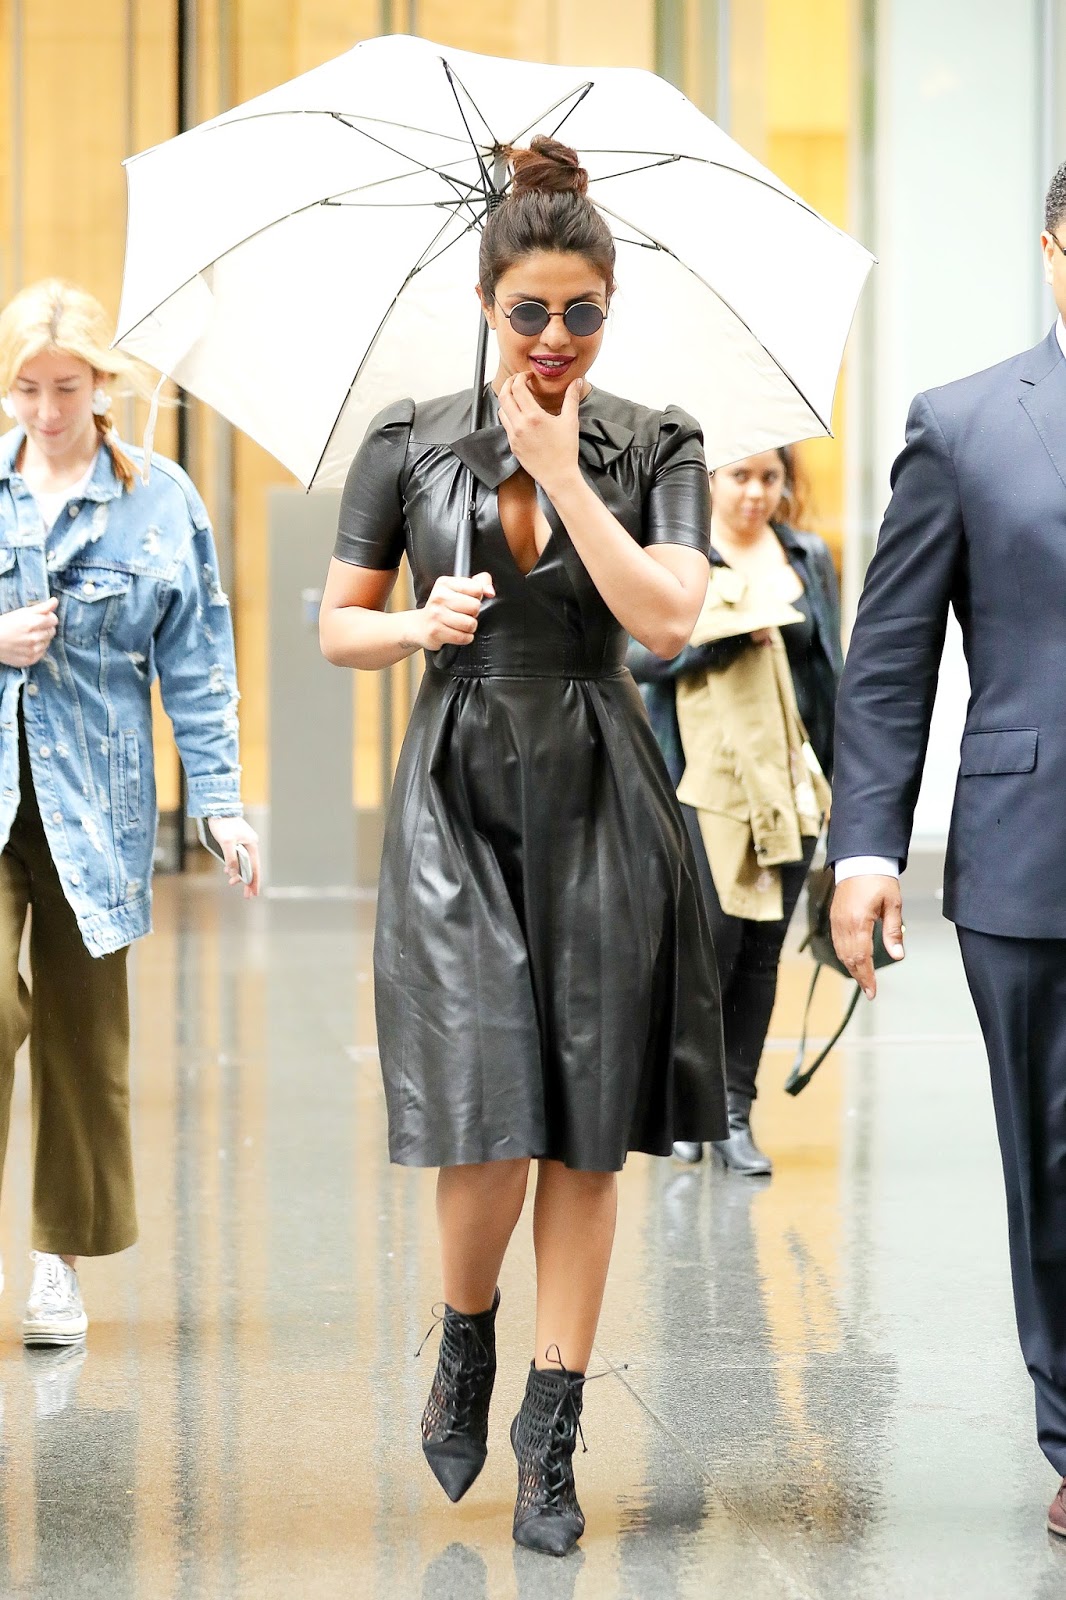 Priyanka Chopra Displayed Her Sexy Cleavage in a Black Leather Dress as She Was Out on a Rainy Day in New York City